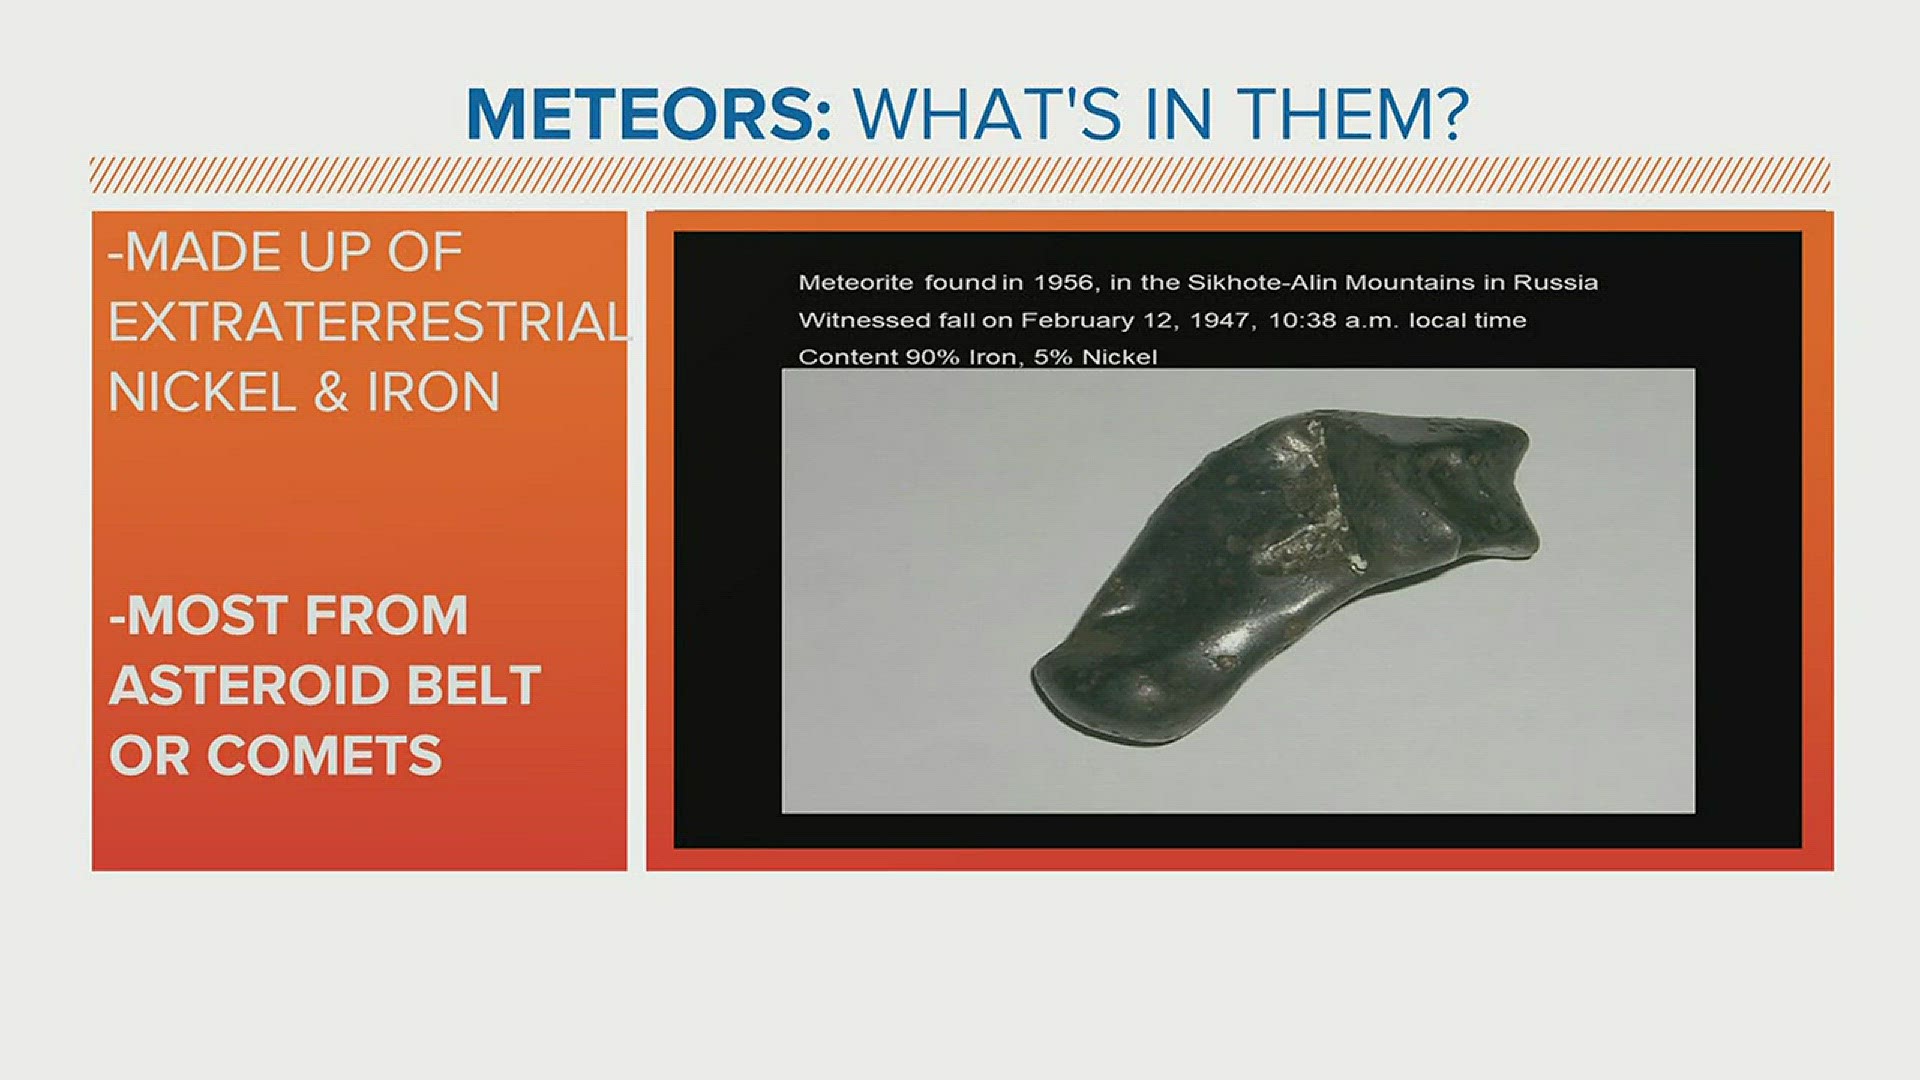 More about meteors